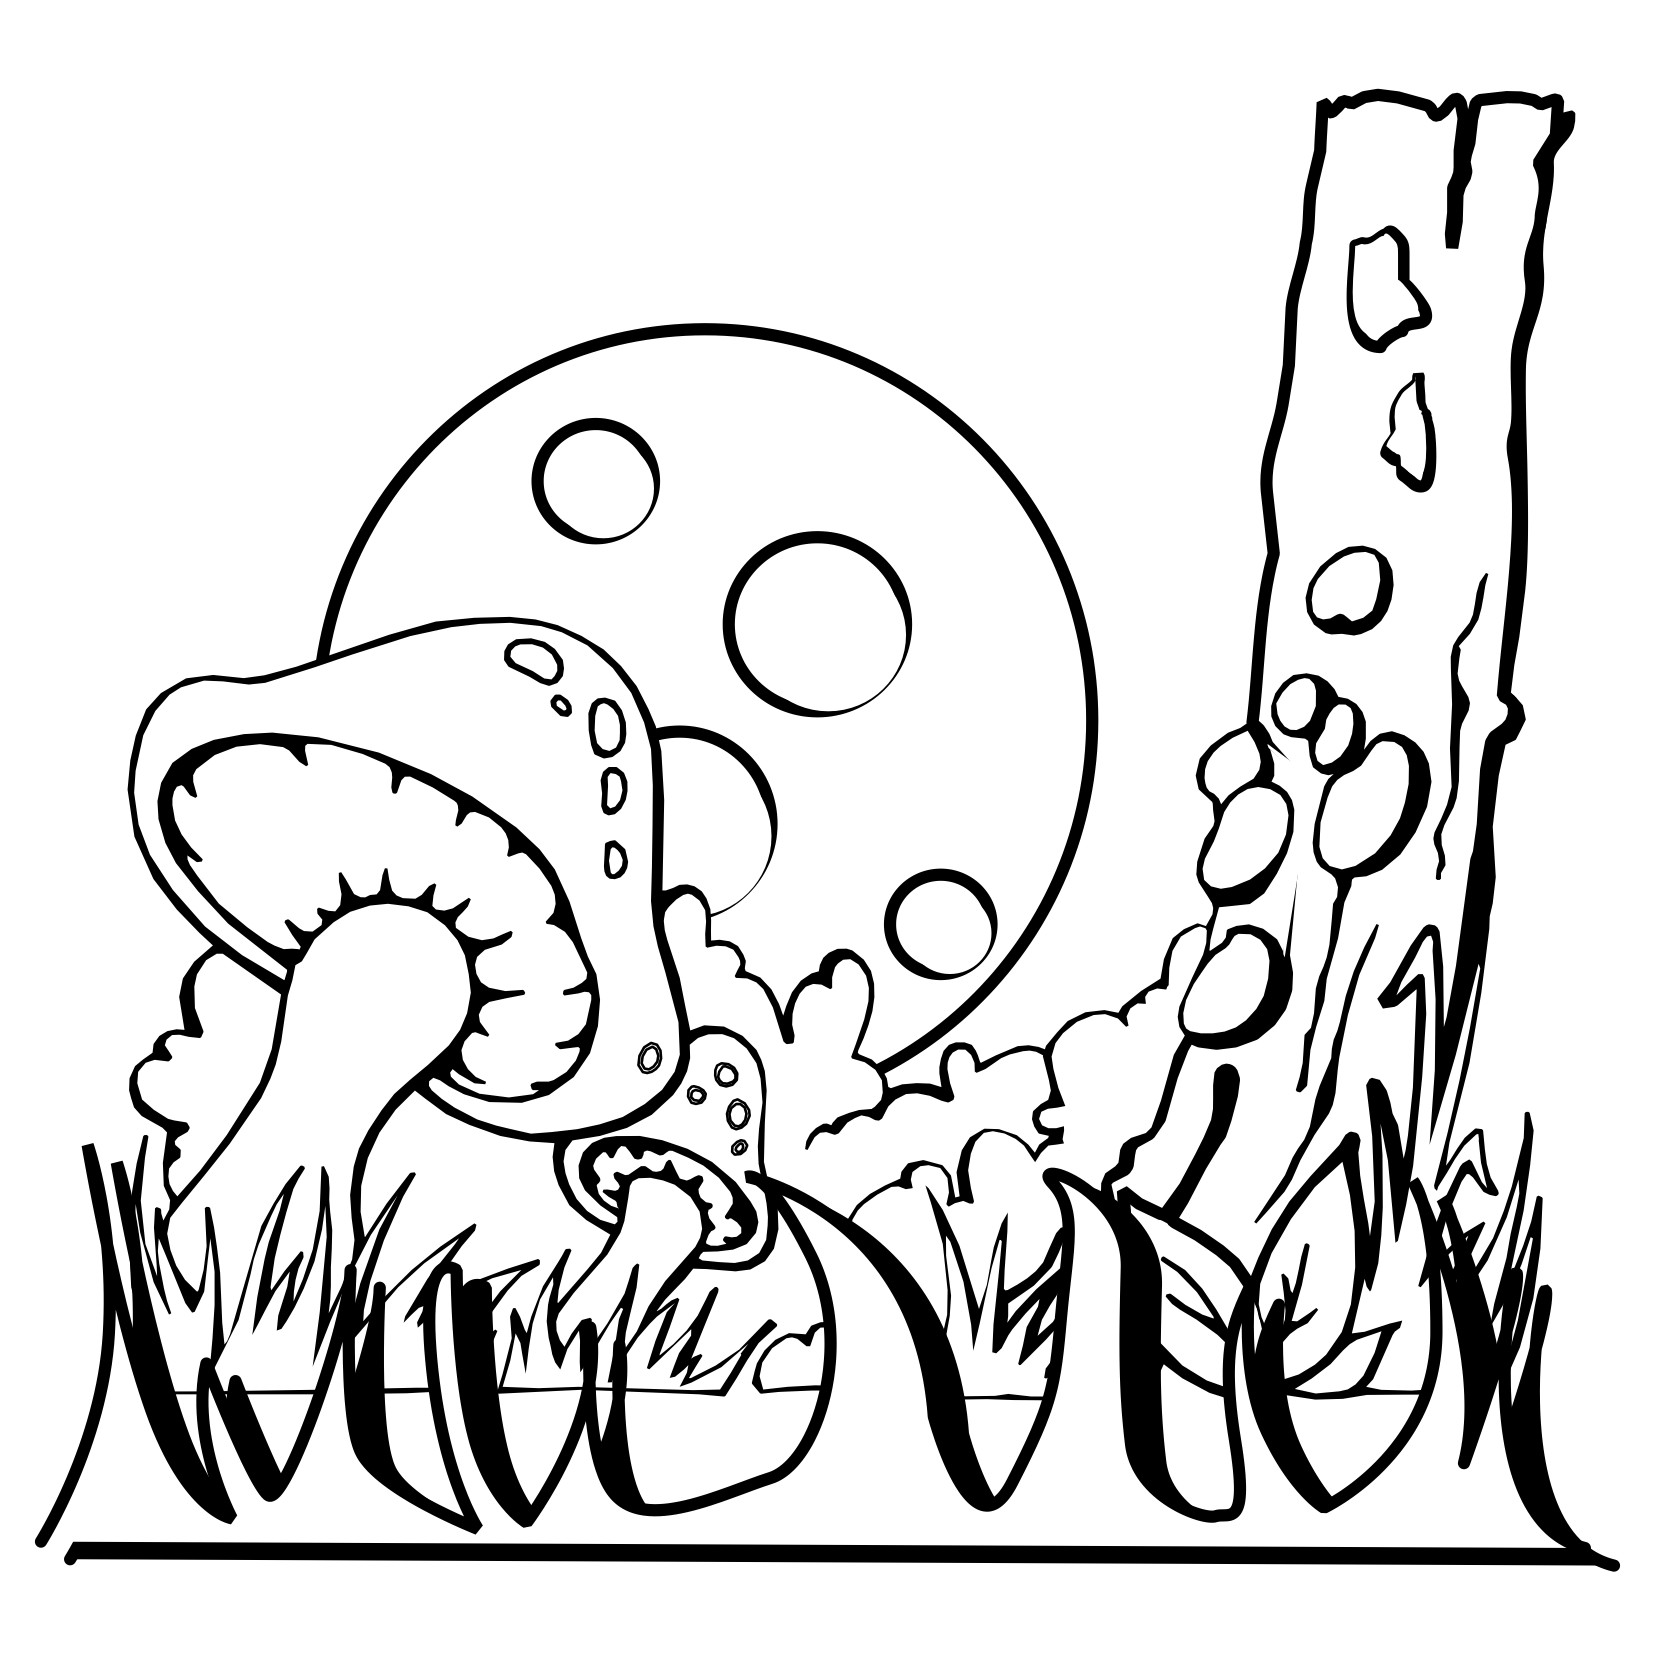 Coloring_Pages
 Fantasy Coloring Pages Best Coloring Pages For Kids